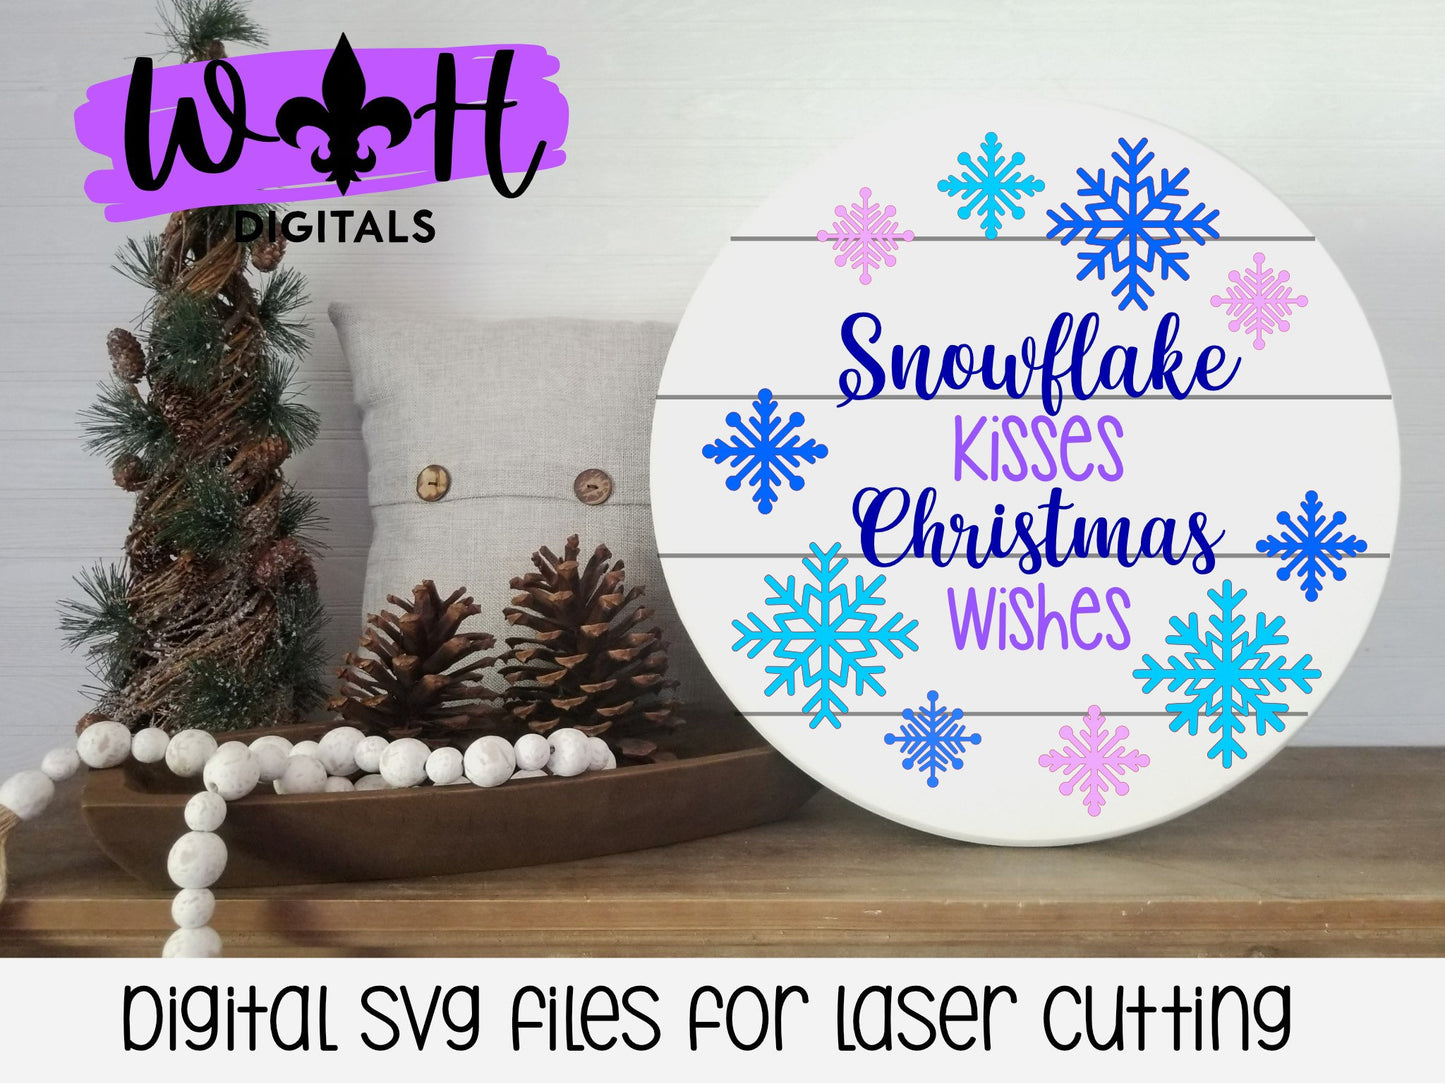 Snowflake Kisses Christmas Wishes Winter Door Hanger Round - Sign Making and DIY Kits - Cut File For Glowforge Lasers - Digital SVG File